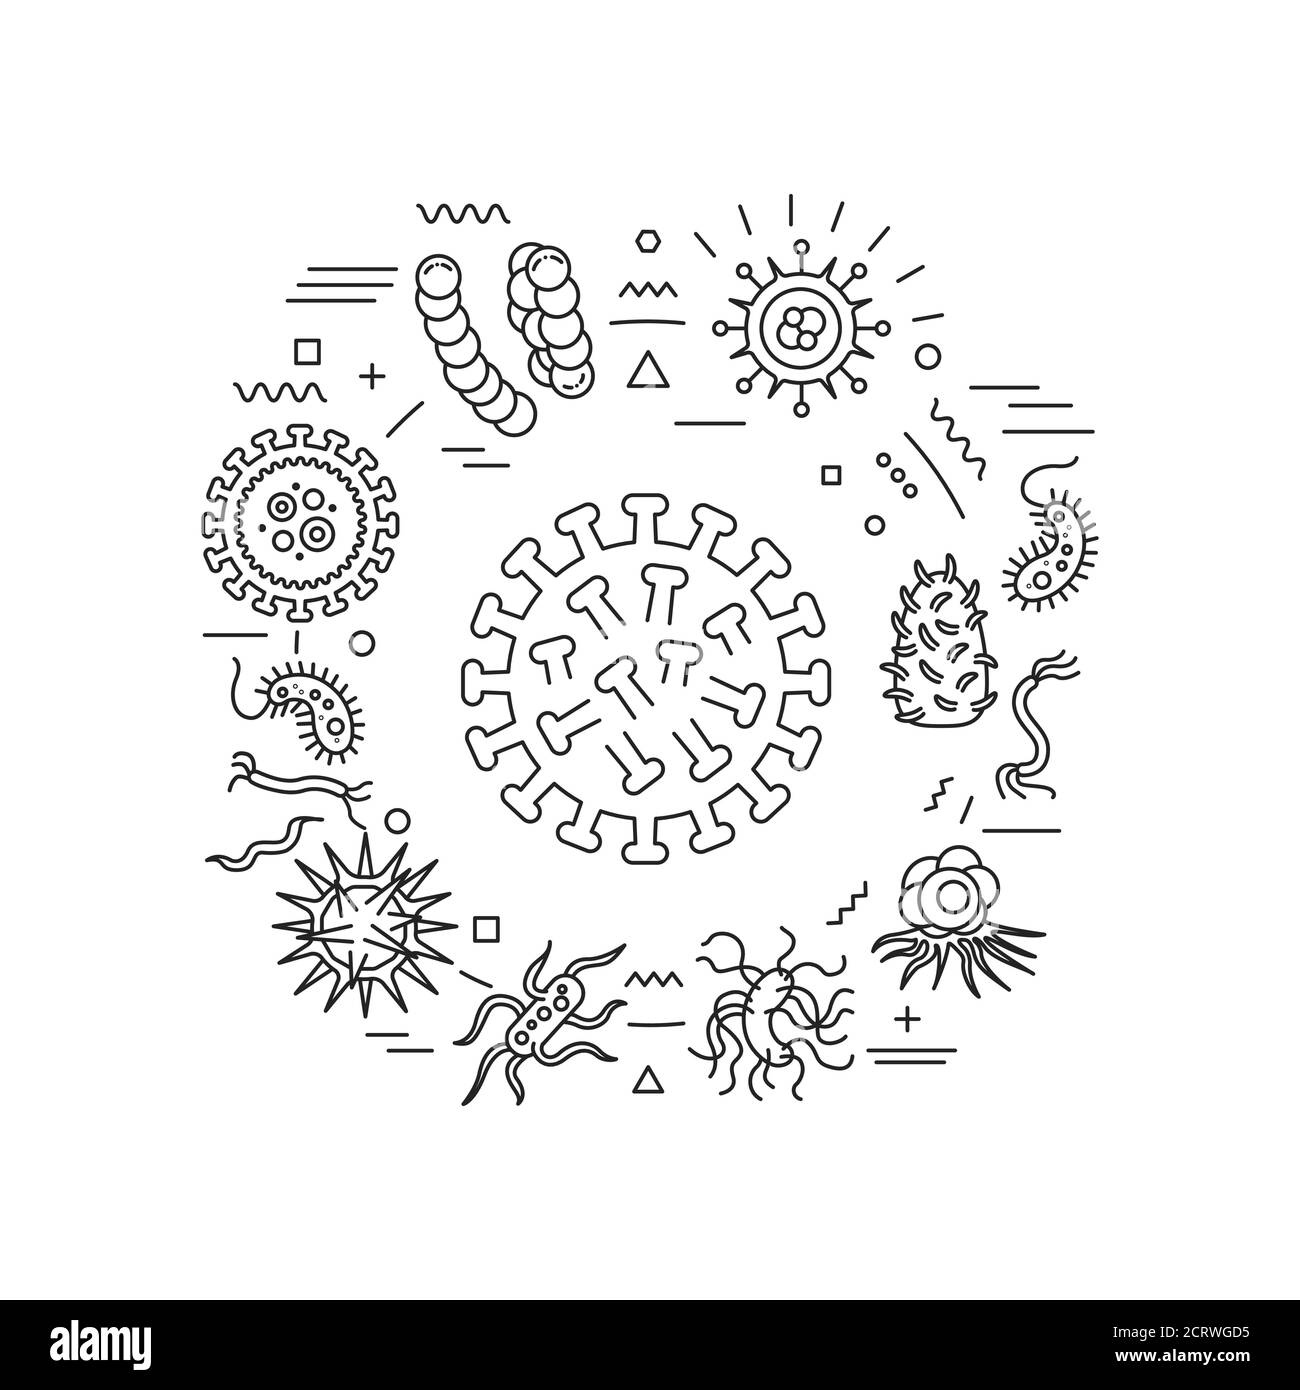 Viruses and germs web banner. Microscopic germ cause diseases. Infographics with linear icons on white background. Creative idea concept. Isolated Stock Vector